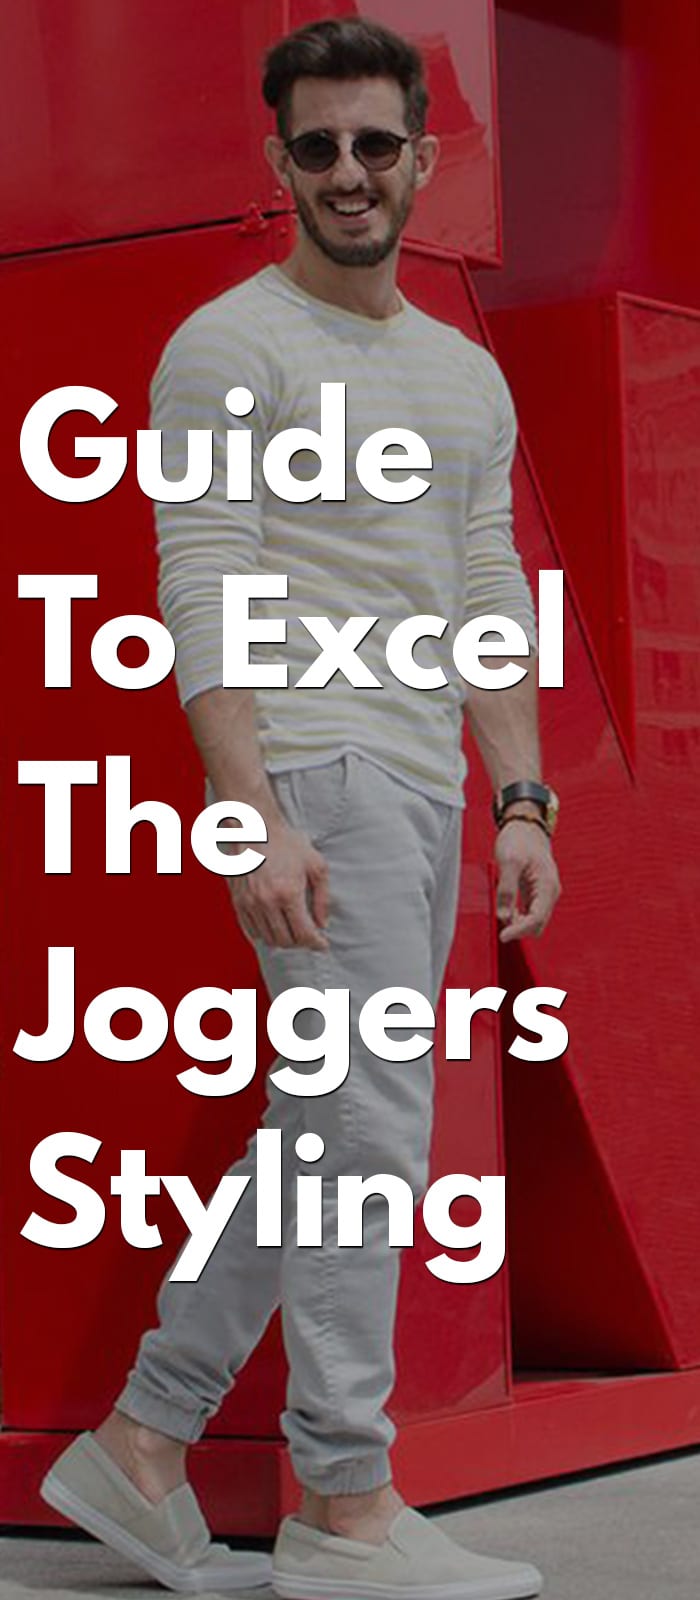 Guide To Excel The Joggers Styling in 2018